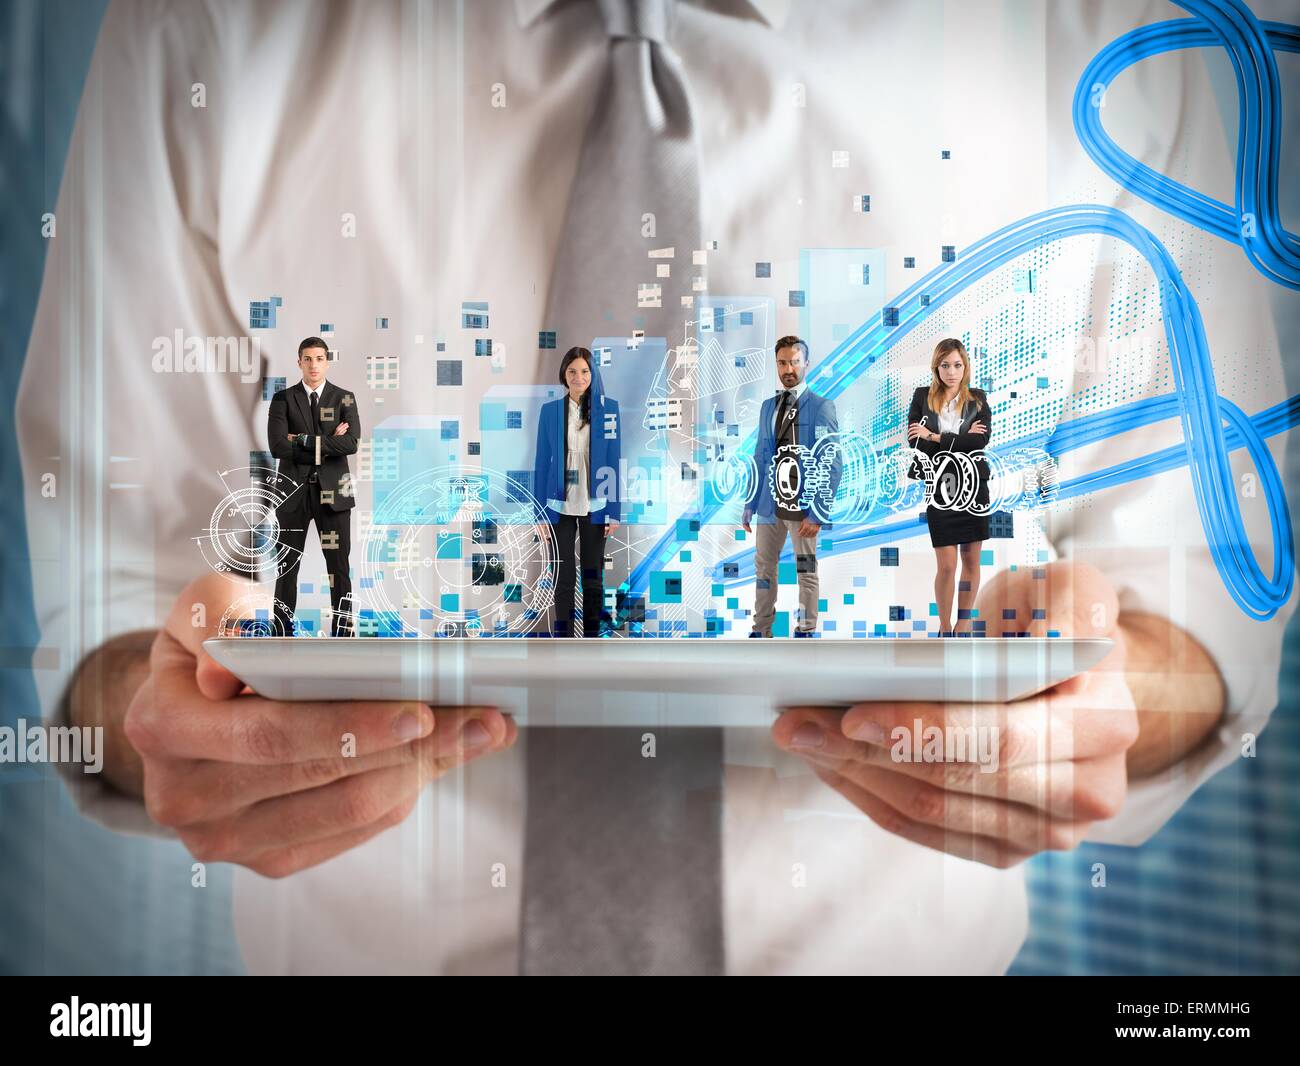 Business team tablet Stock Photo